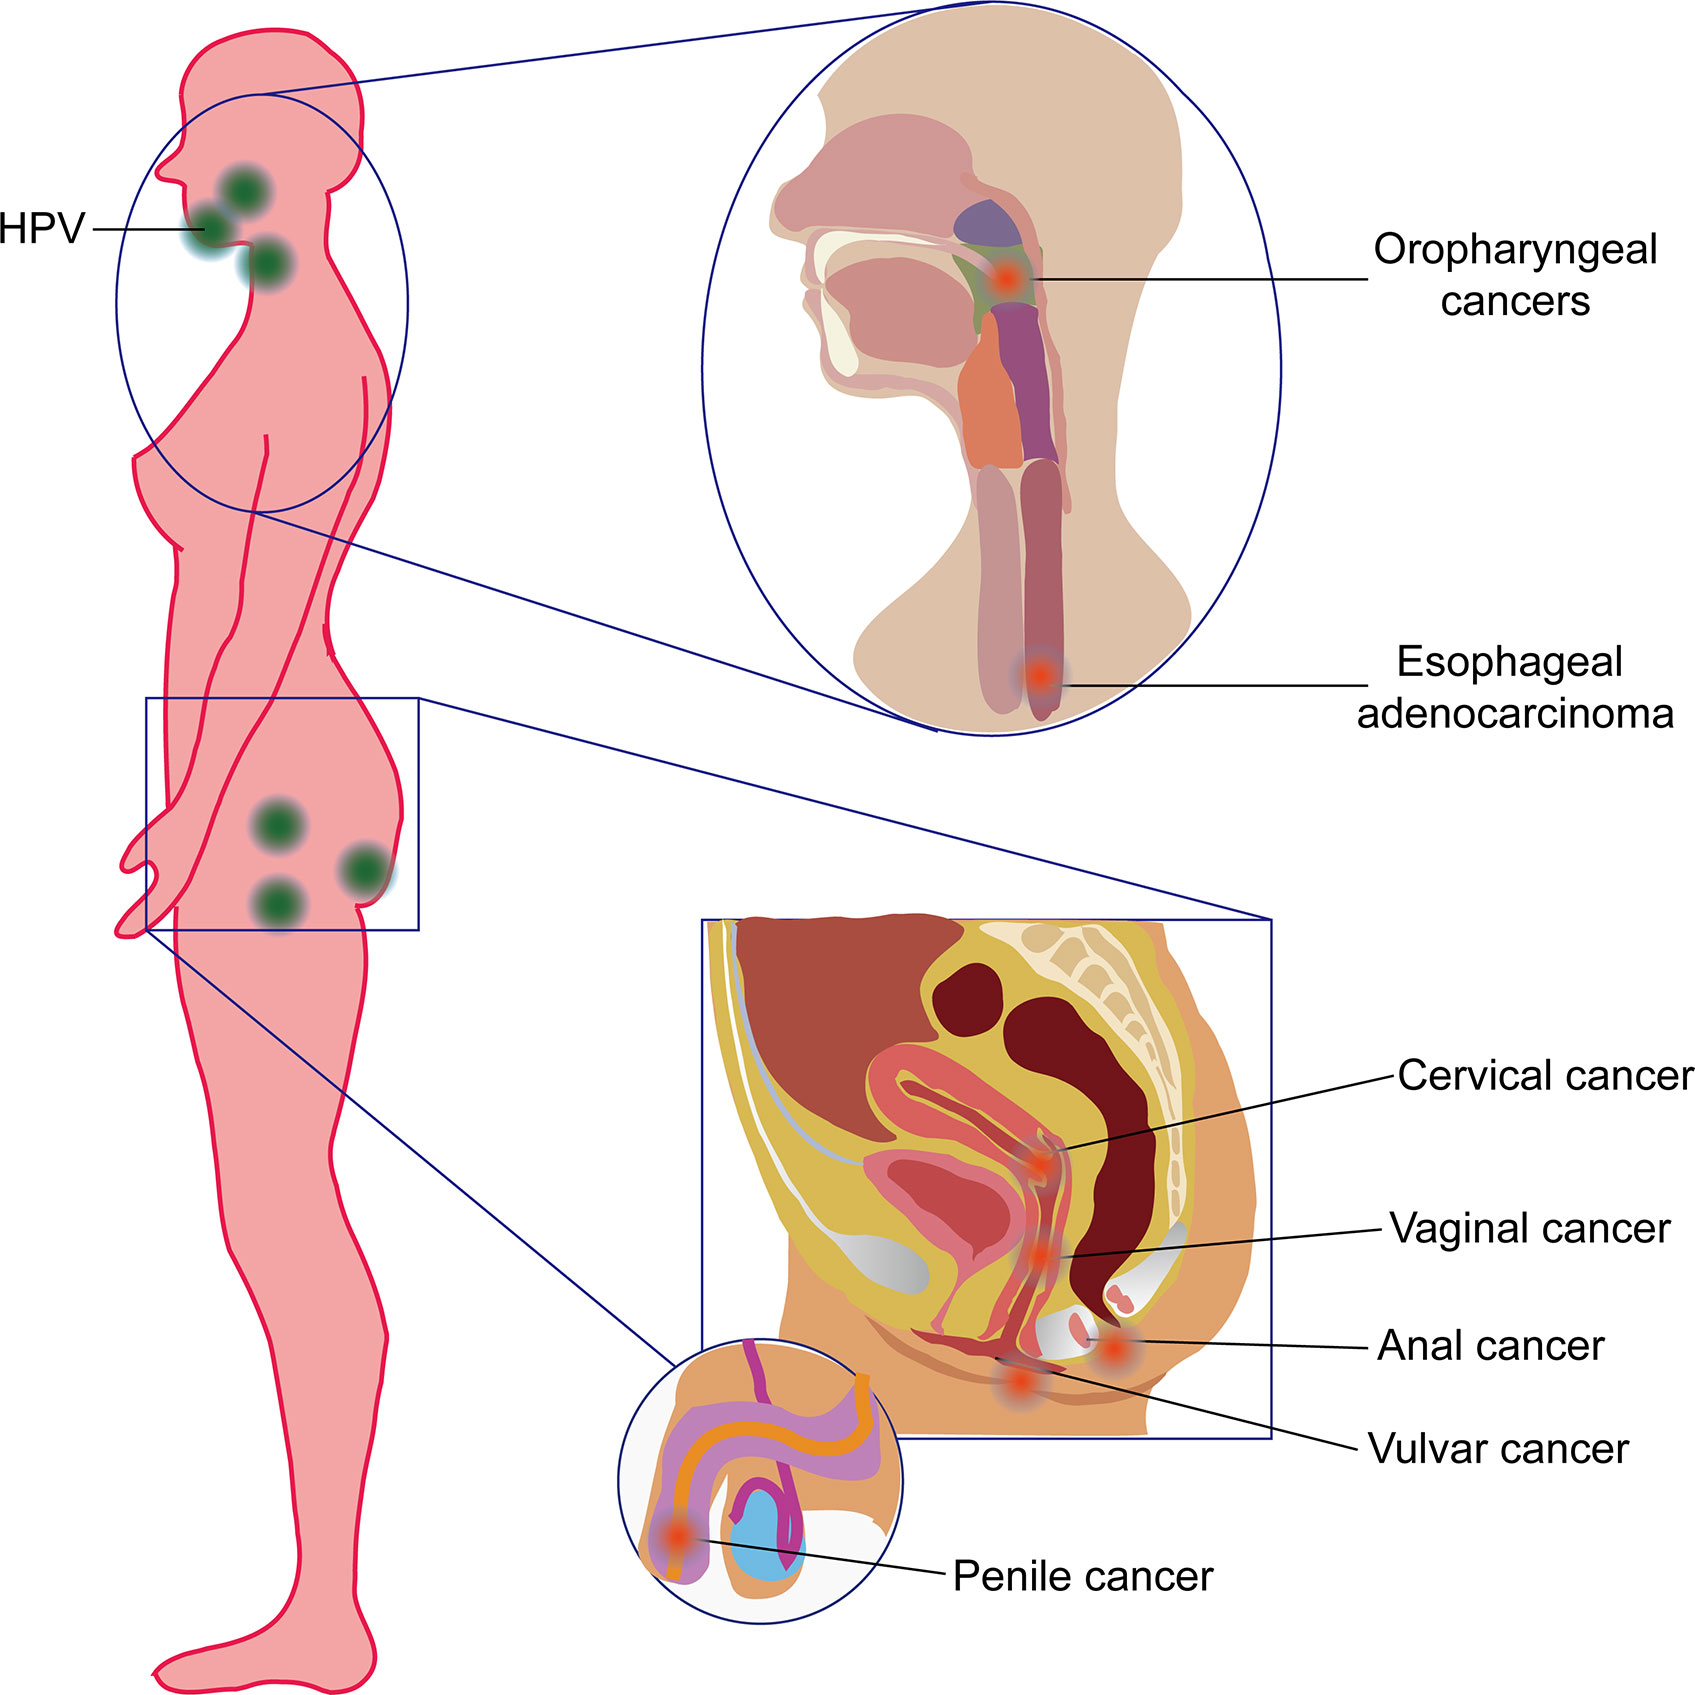 hpv positive means cancer